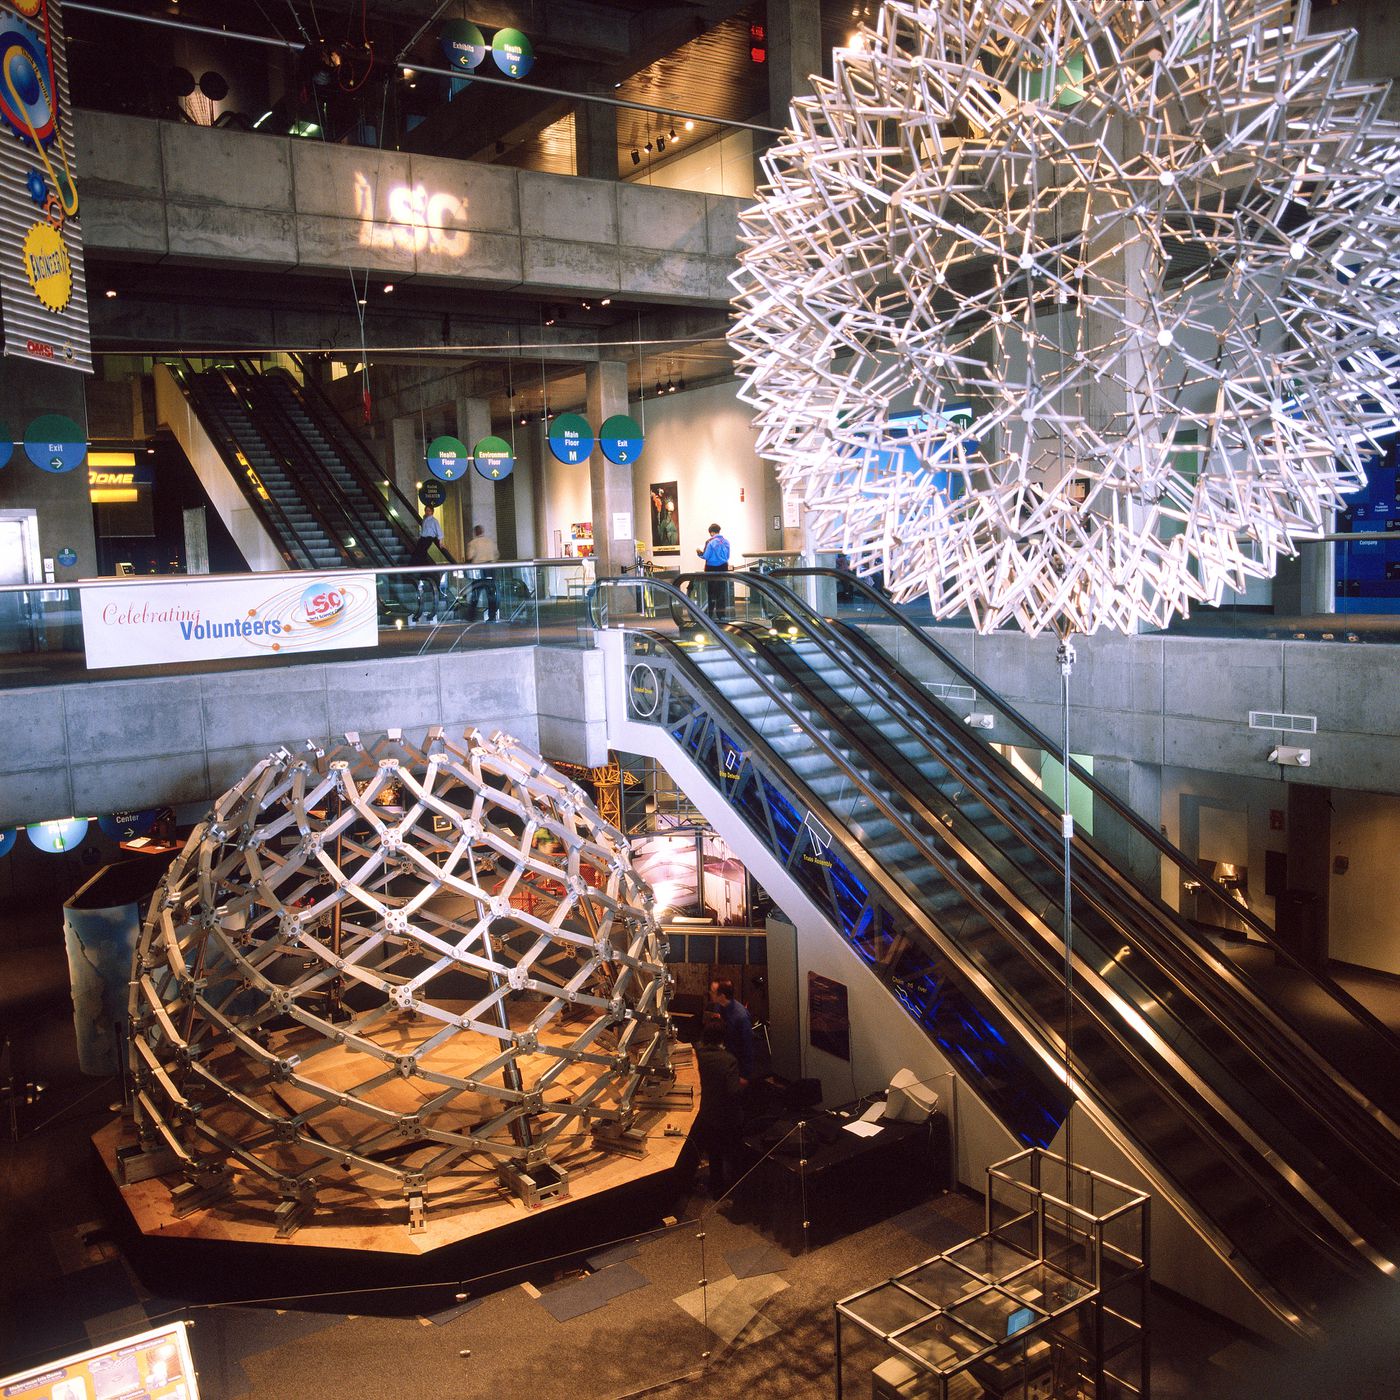 Iris Dome and Hoberman Sphere, Liberty Science Center, Jersey City, New Jersey